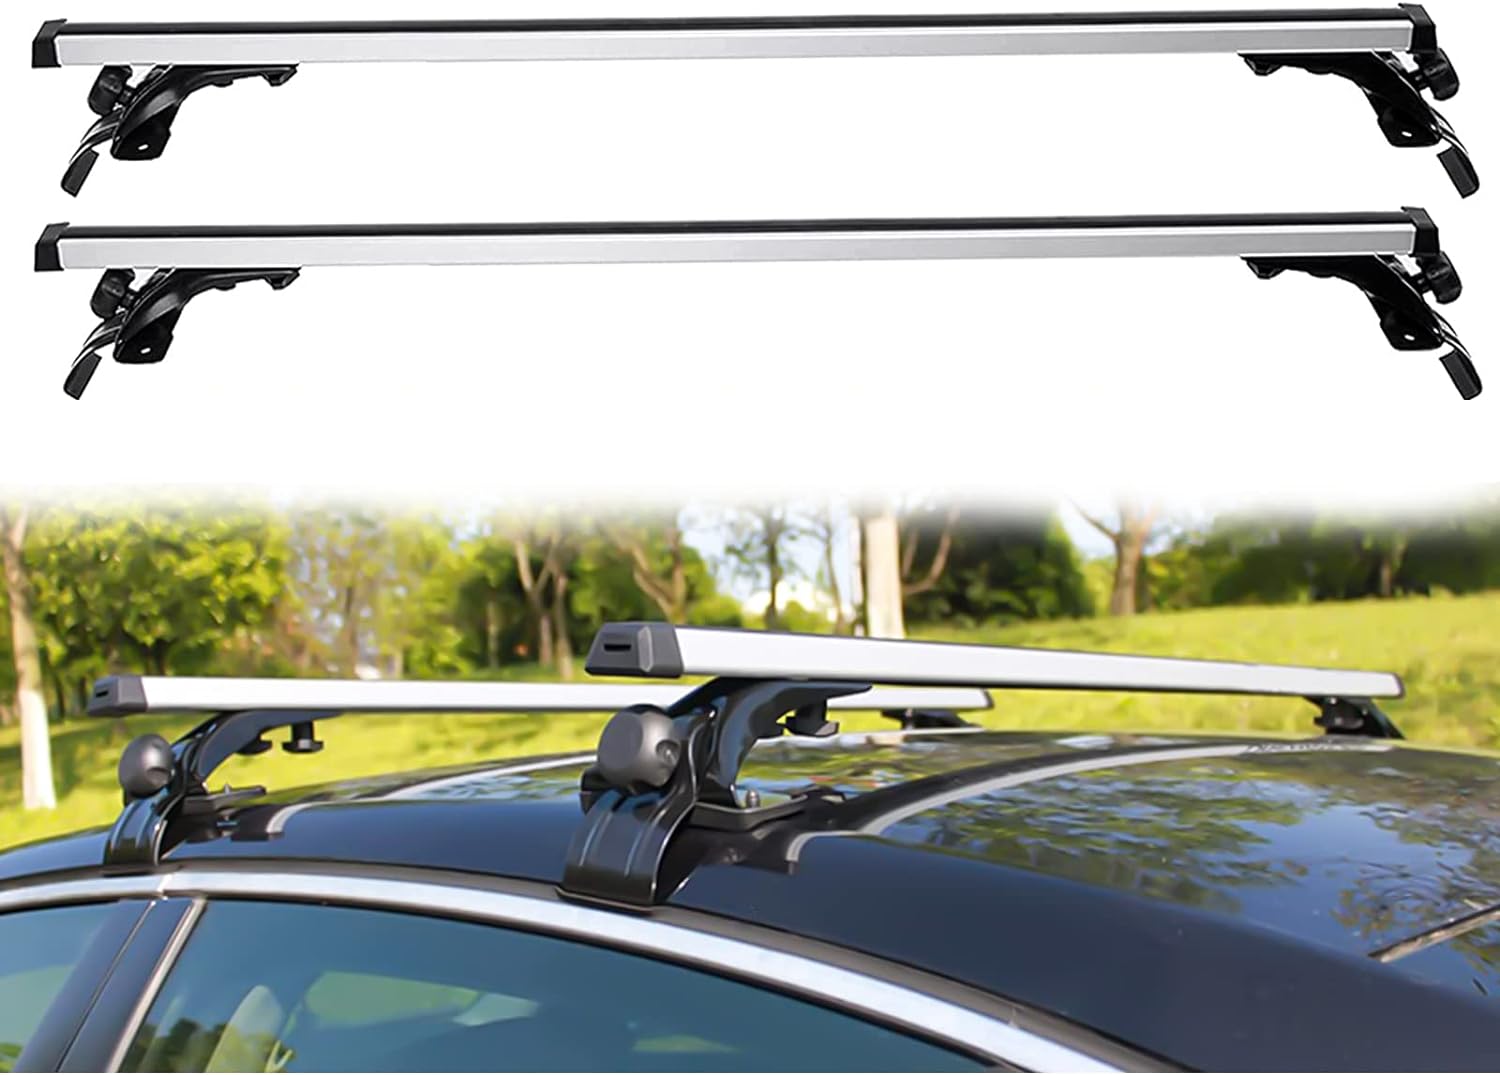 Autodianke Parts ADP Universal Roof Rack Crossbars, 2-Piece 48" Aluminum Car Rooftop Cross Bars Set with 3PCS Mounting Clamps, Luggage Carg